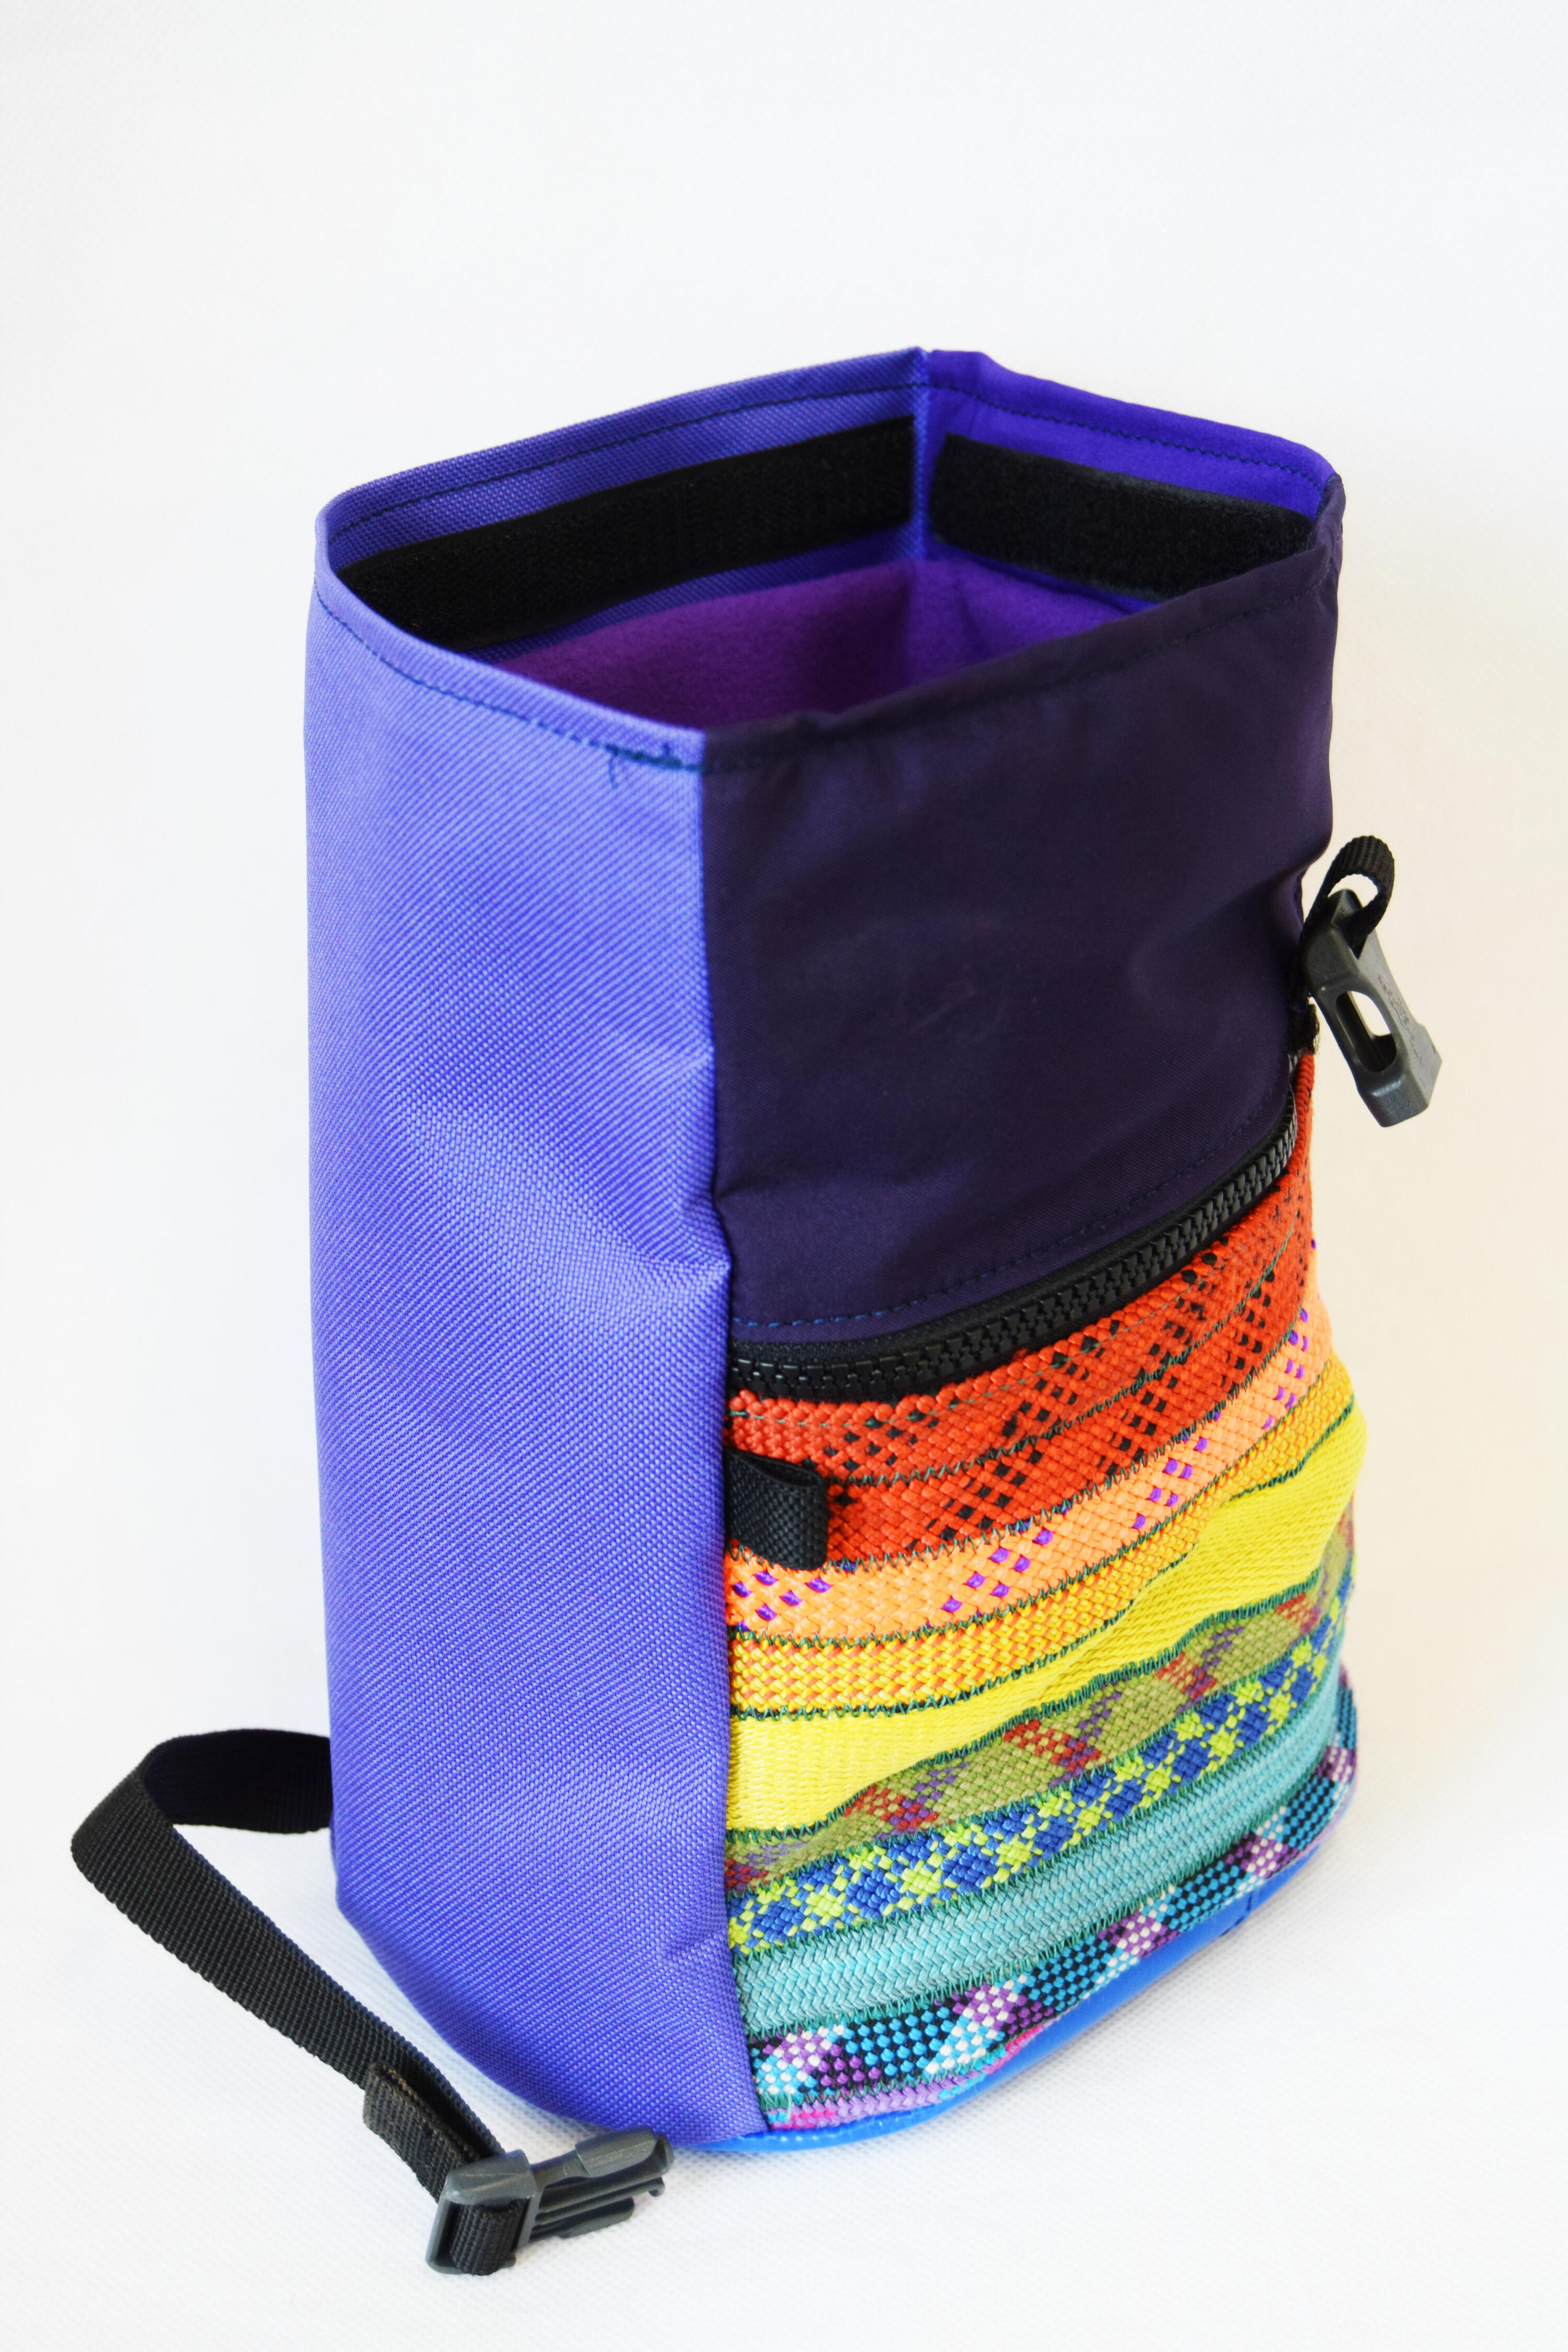 Boulder bag made with recycled climbing rope and upcycled fabric. Rainbow 2/4